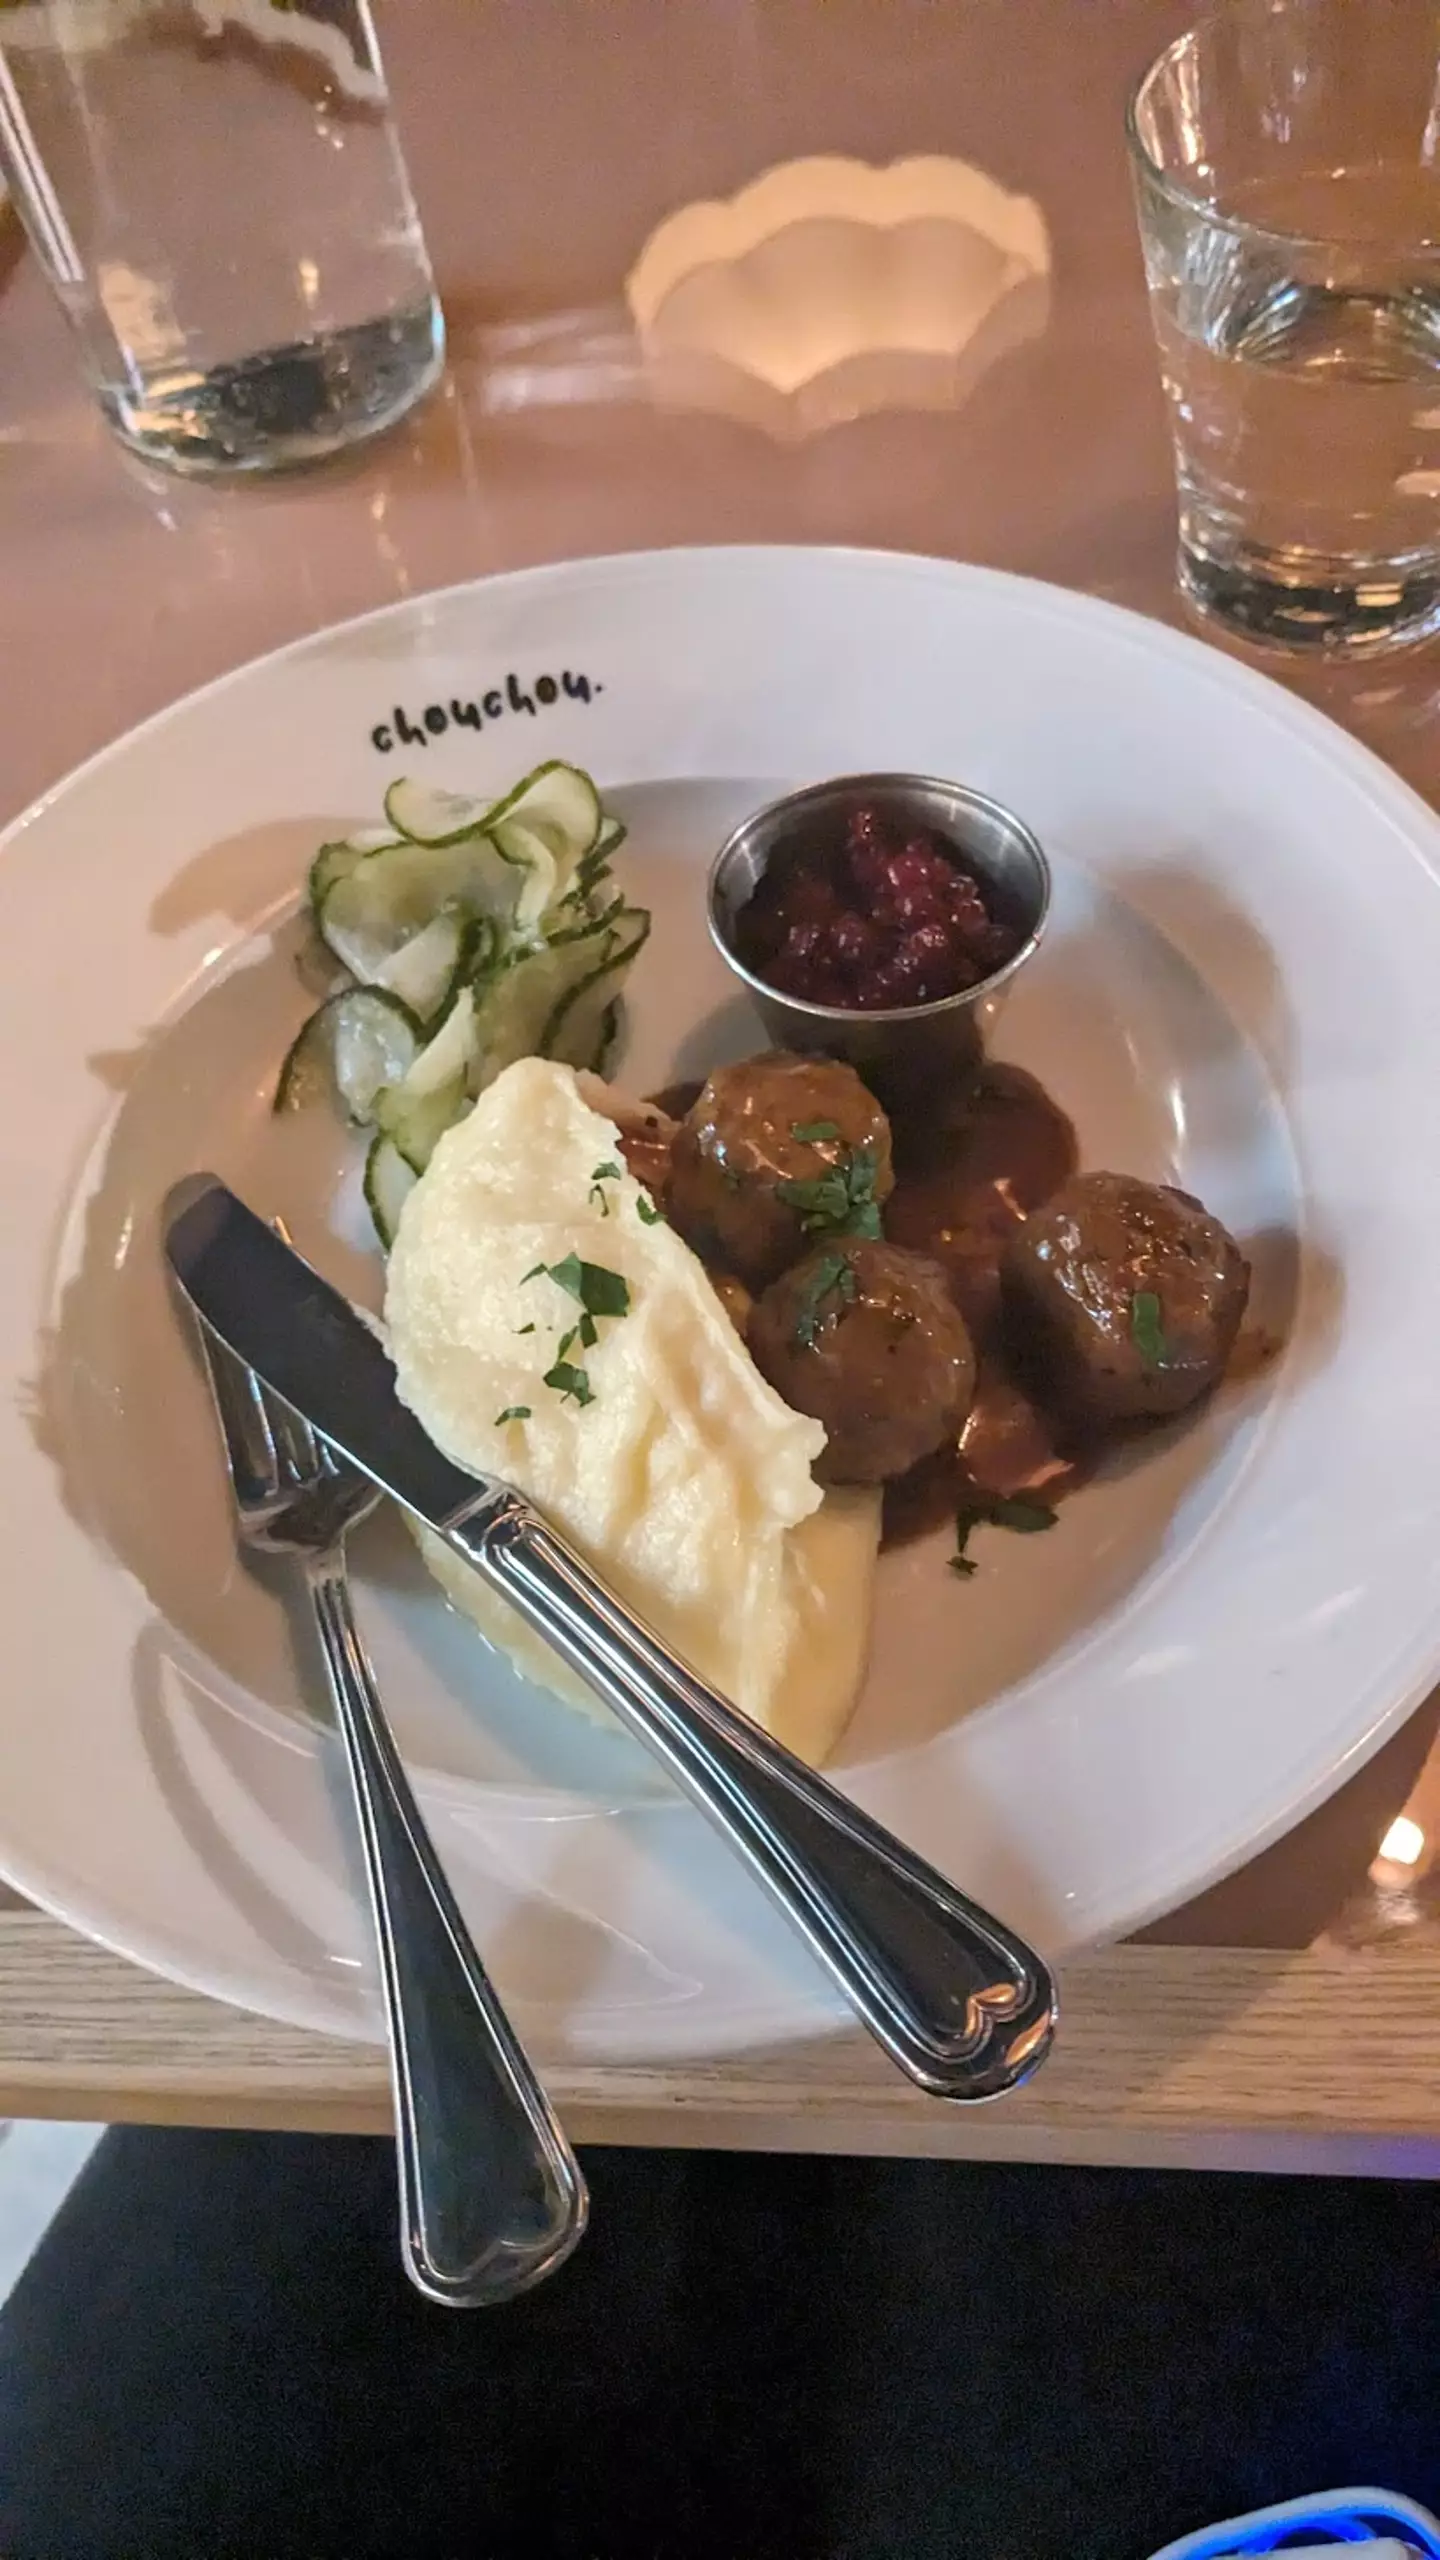 Lauren treated herself to a Swedish meatballs dinner before jetting off back to London.